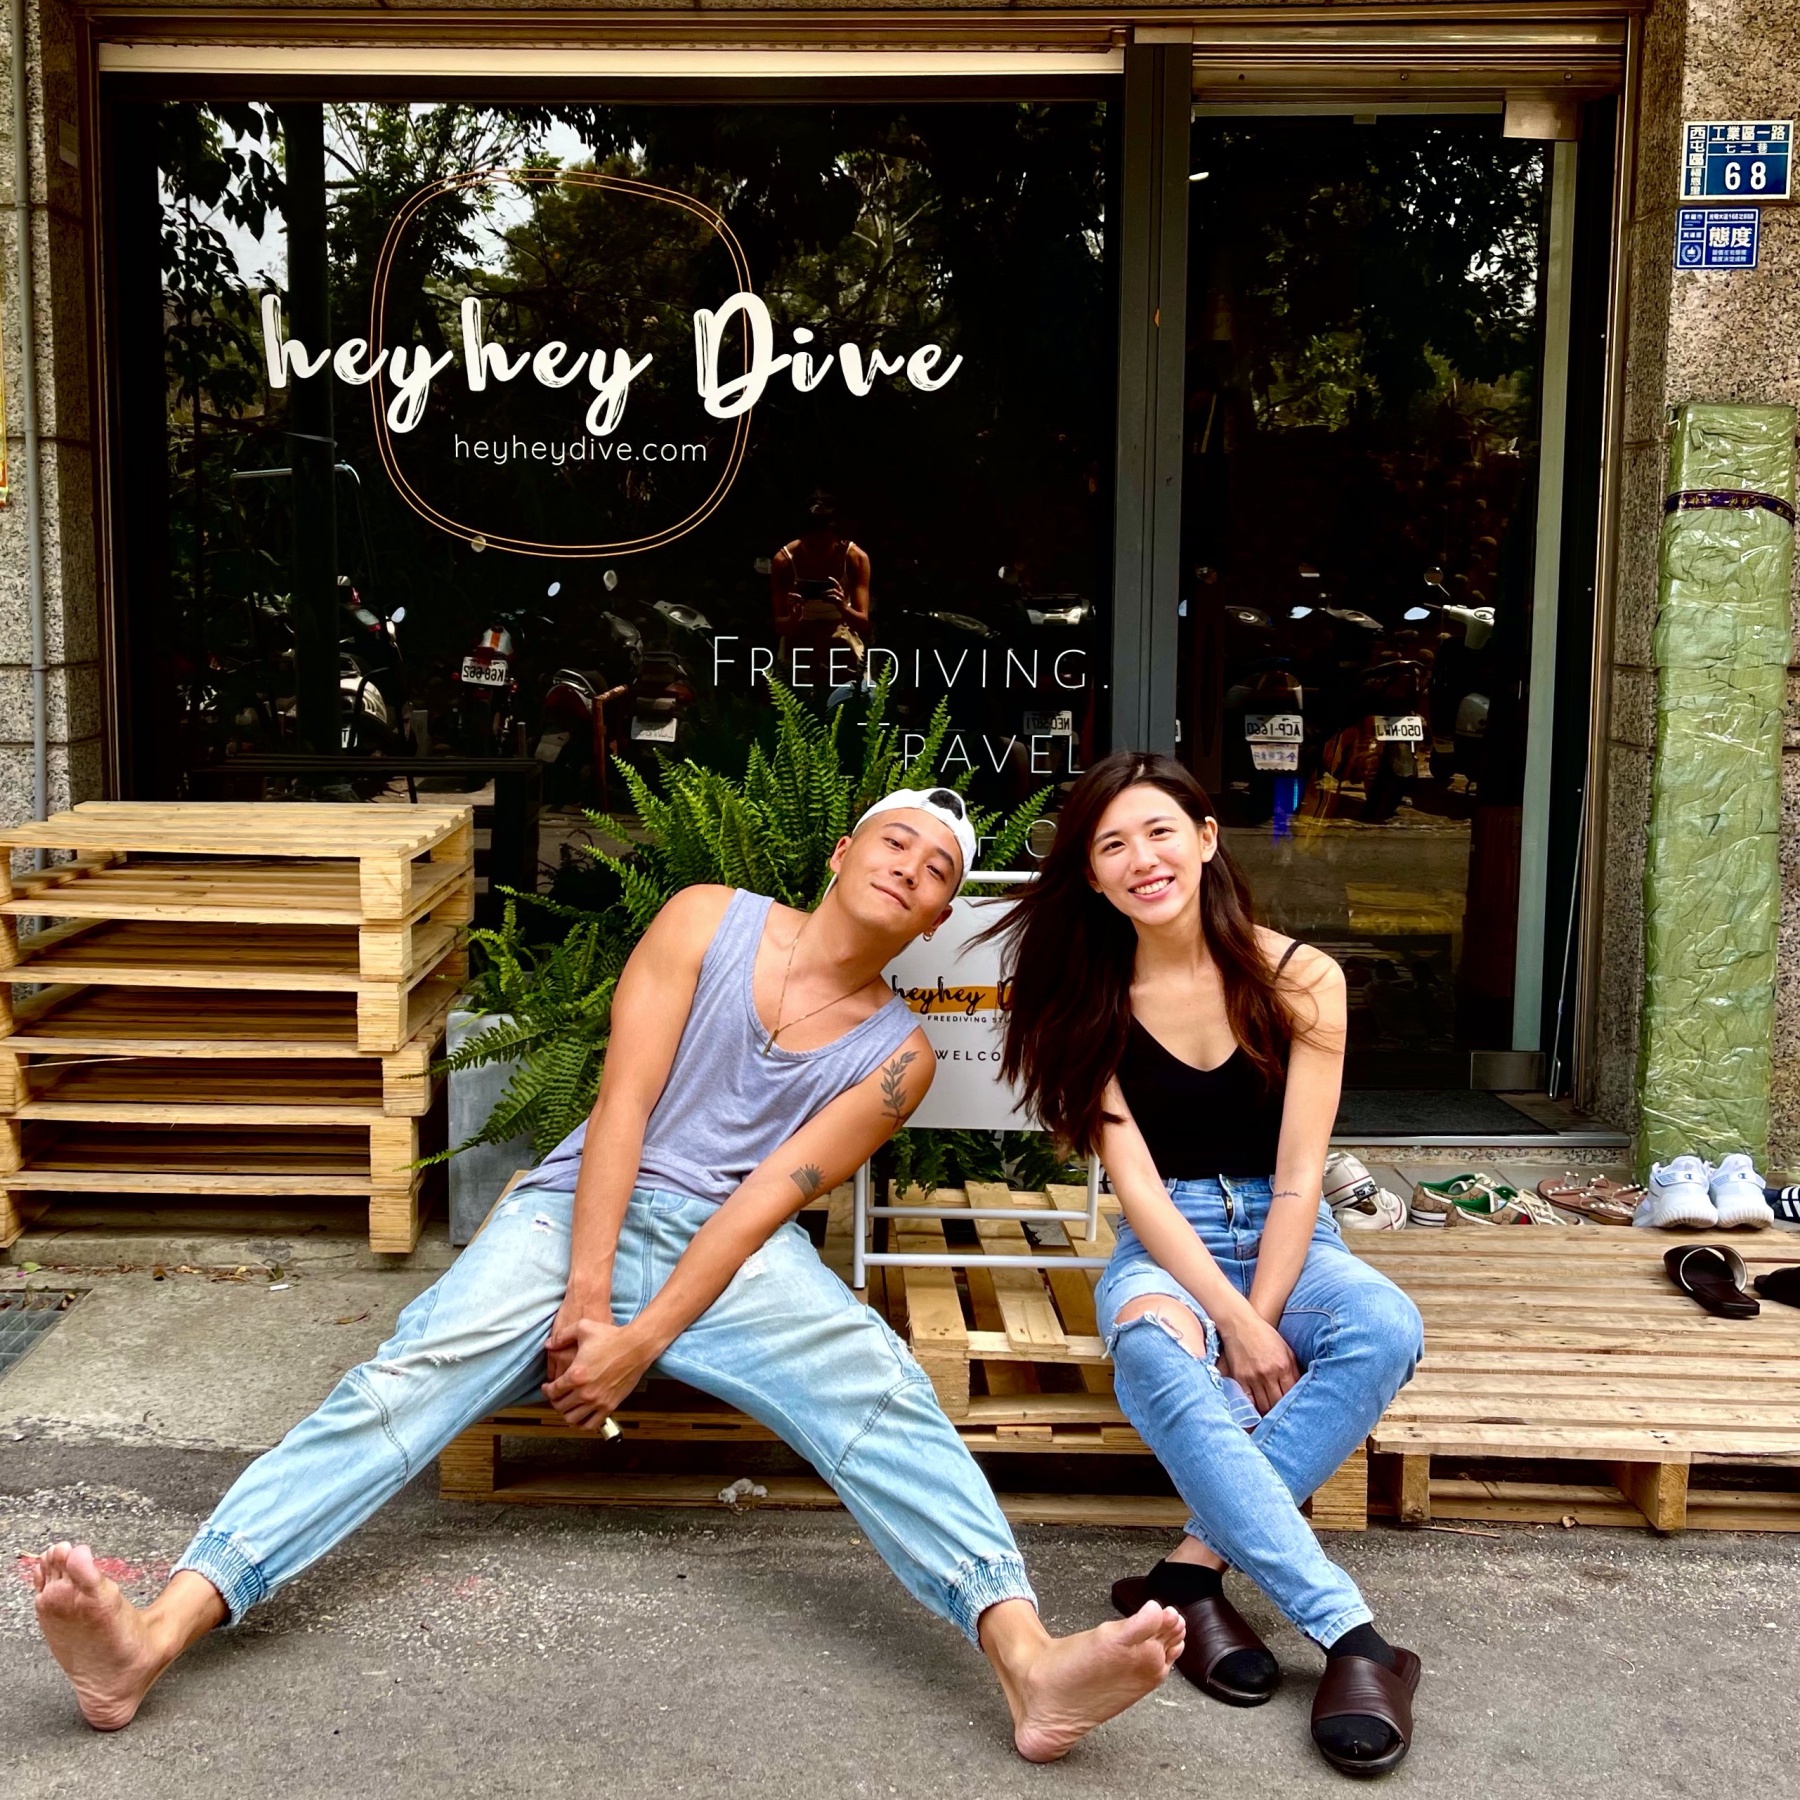 [Heyhey Dive Review] Super Chill Taichung Self Diving Studio, group training and diving trips make free diving a daily routine 4